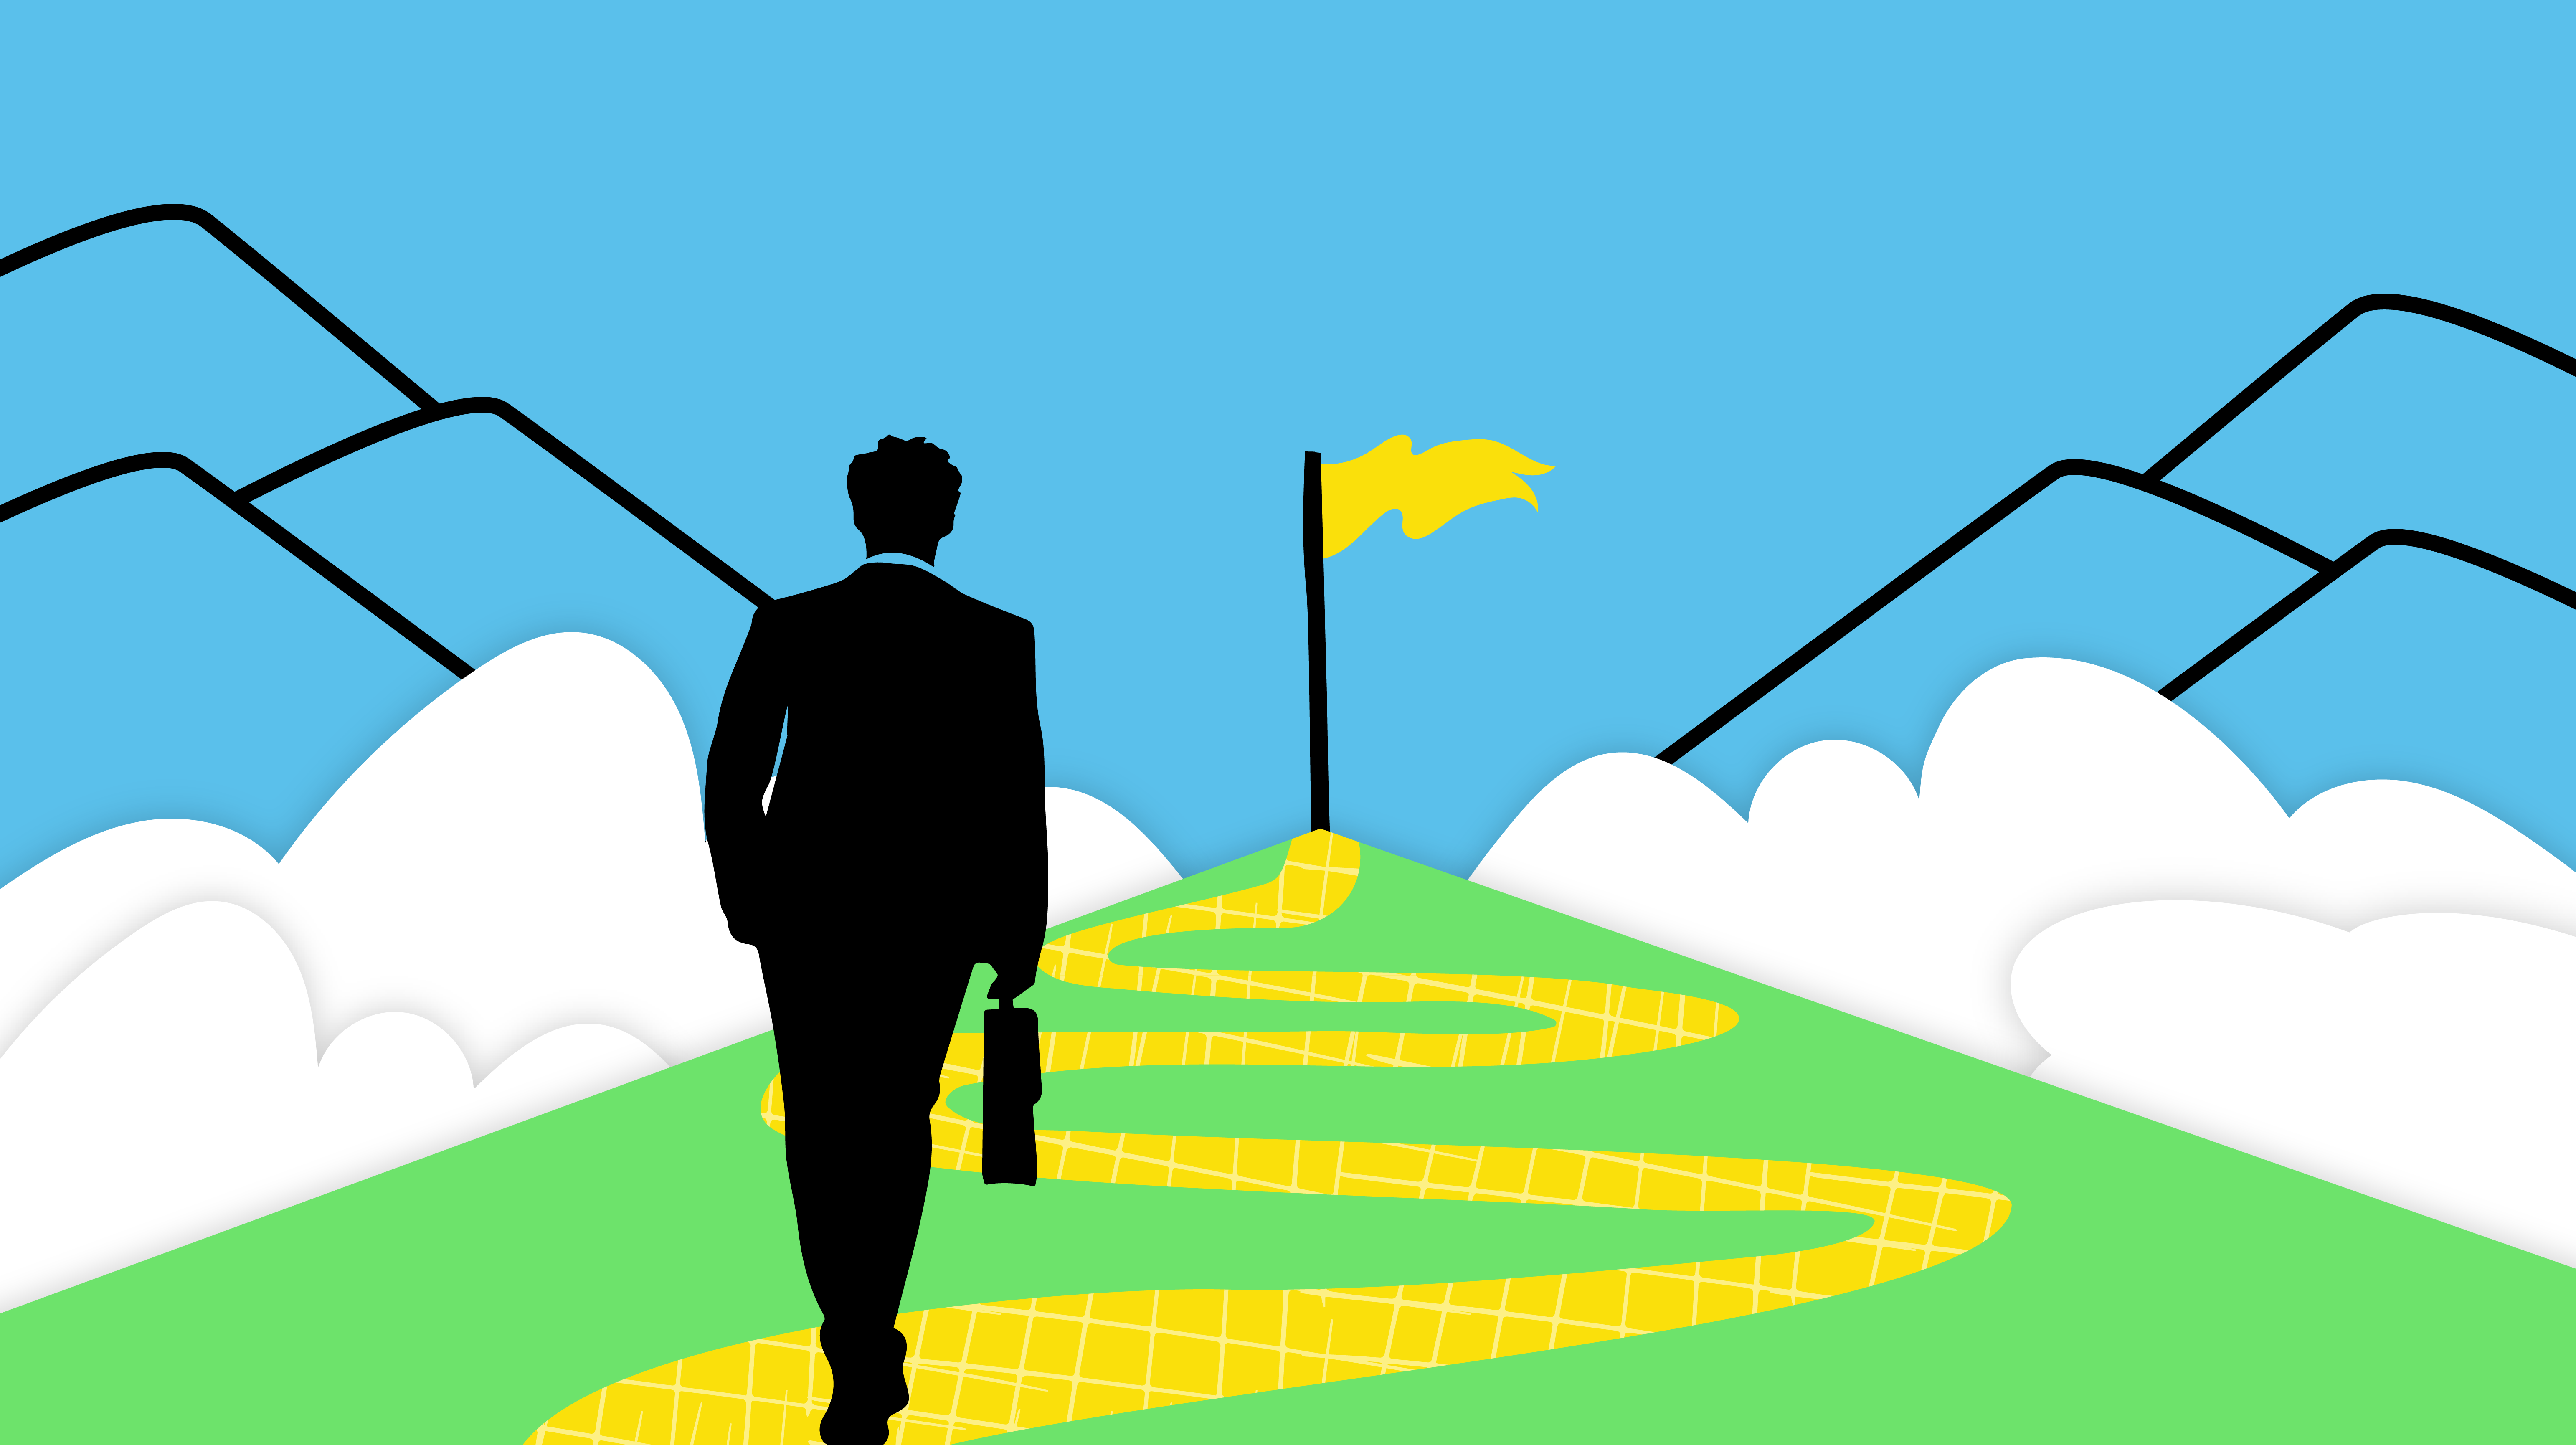 Rethinking the linear career path